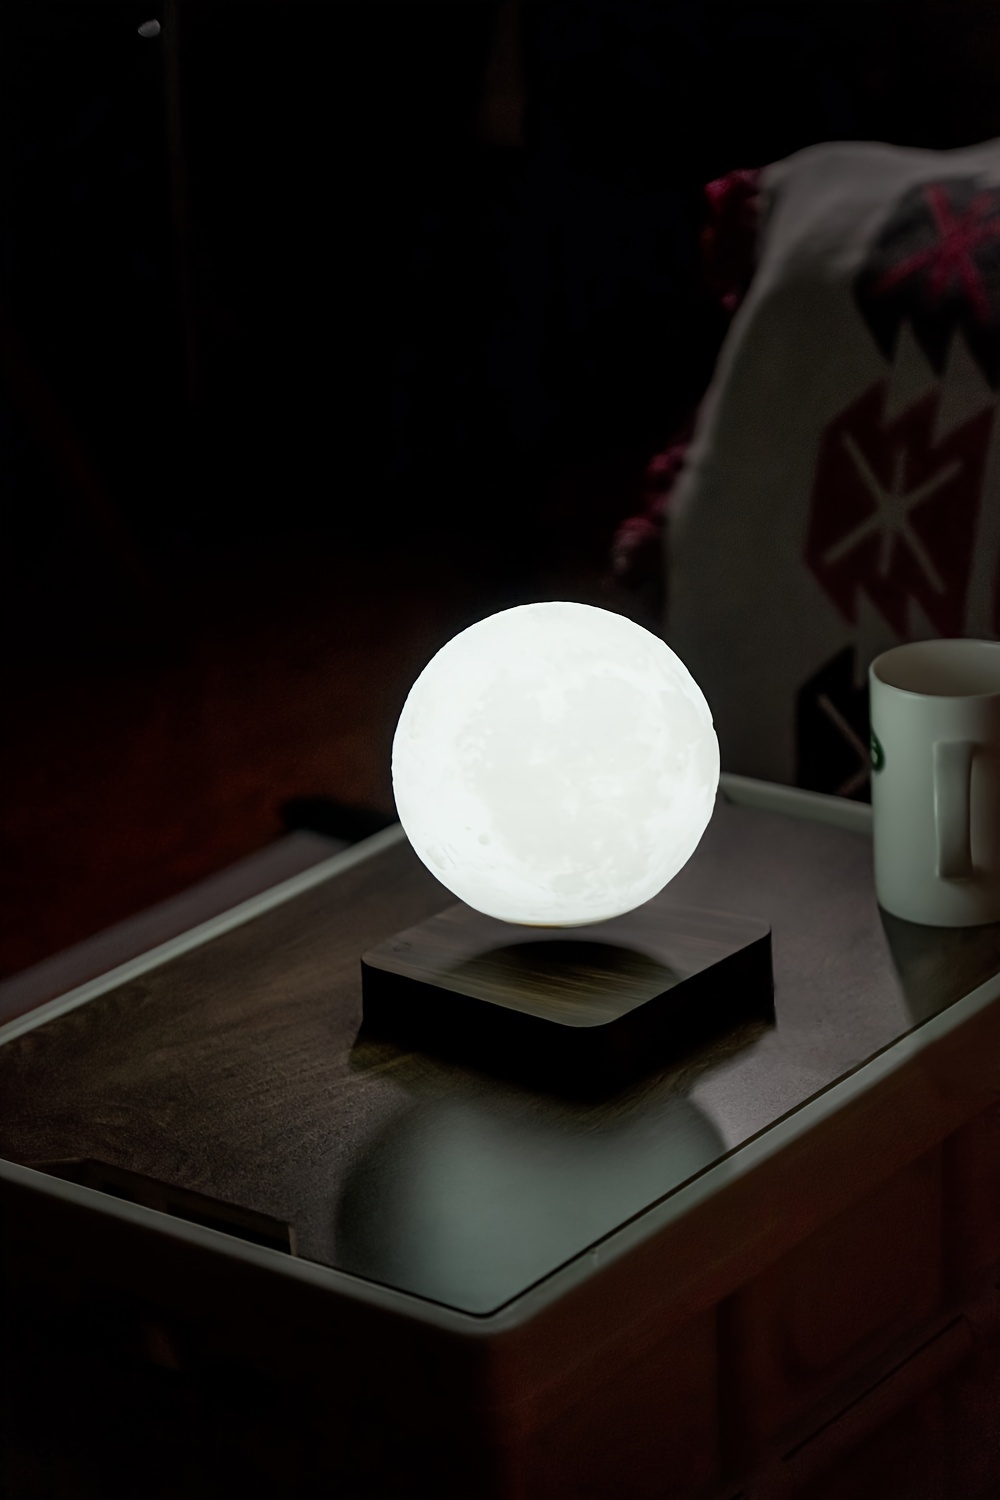 1pc levitating moon table lamp magnetic floating night light with 3 lighting modes 3d printed levitation bedside table lamp for office bedroom home decoration details 6